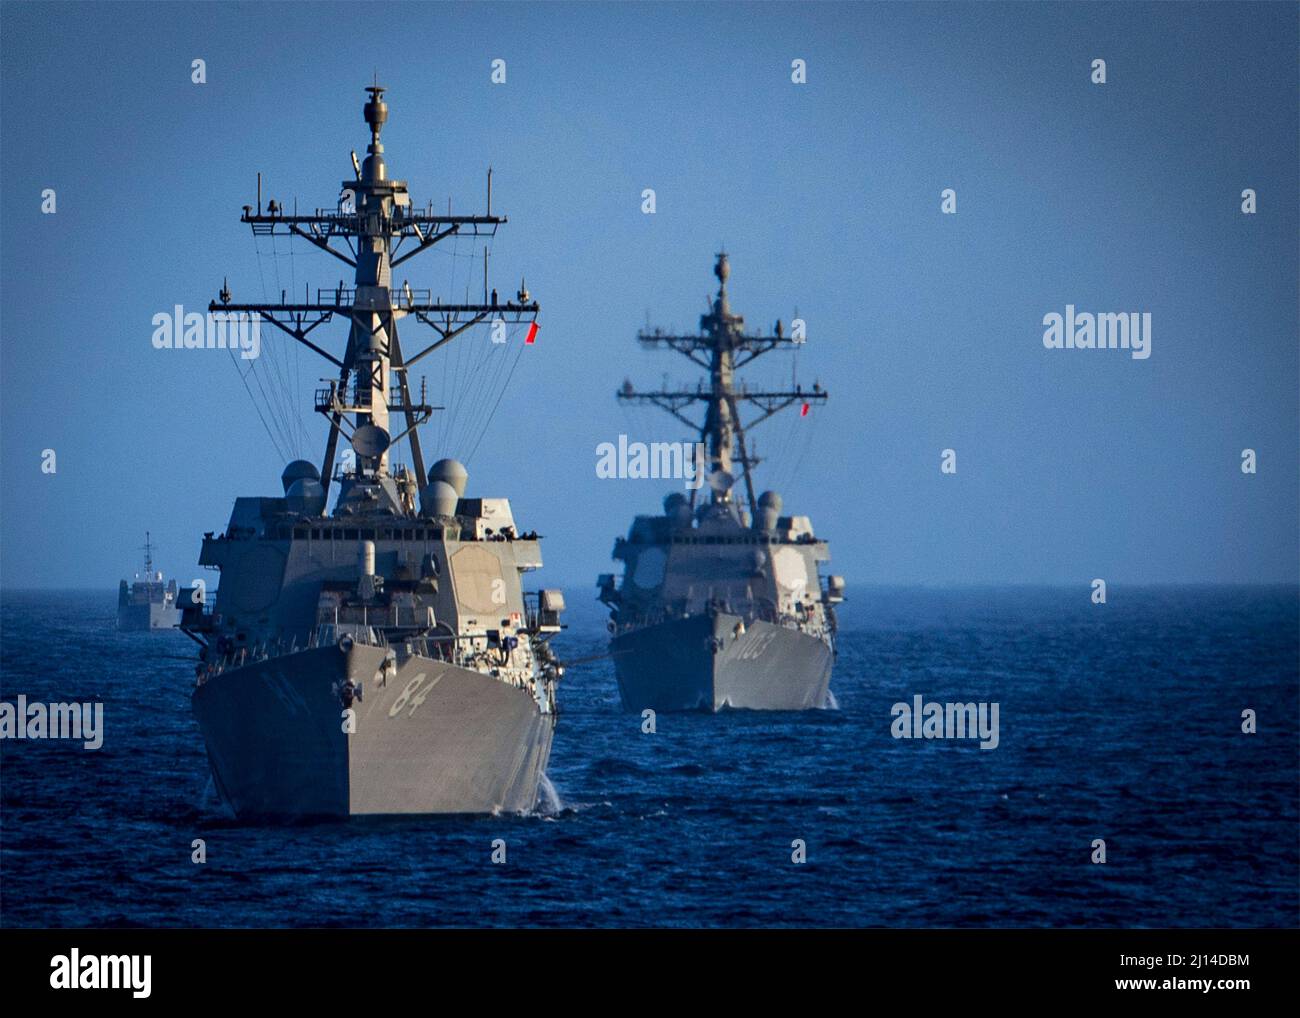 Atlantic Ocean, United States. 23 February, 2022. The U.S. Navy Arleigh-burke class guided-missile destroyers USS Bulkeley, left, and the USS Truxton sail in formation during a Surface Warfare Advanced Tactical Training live-fire exercise, February 23, 2022 in the Atlantic Ocean.  Credit: MC3 Bryan Valek/Planetpix/Alamy Live News Stock Photo